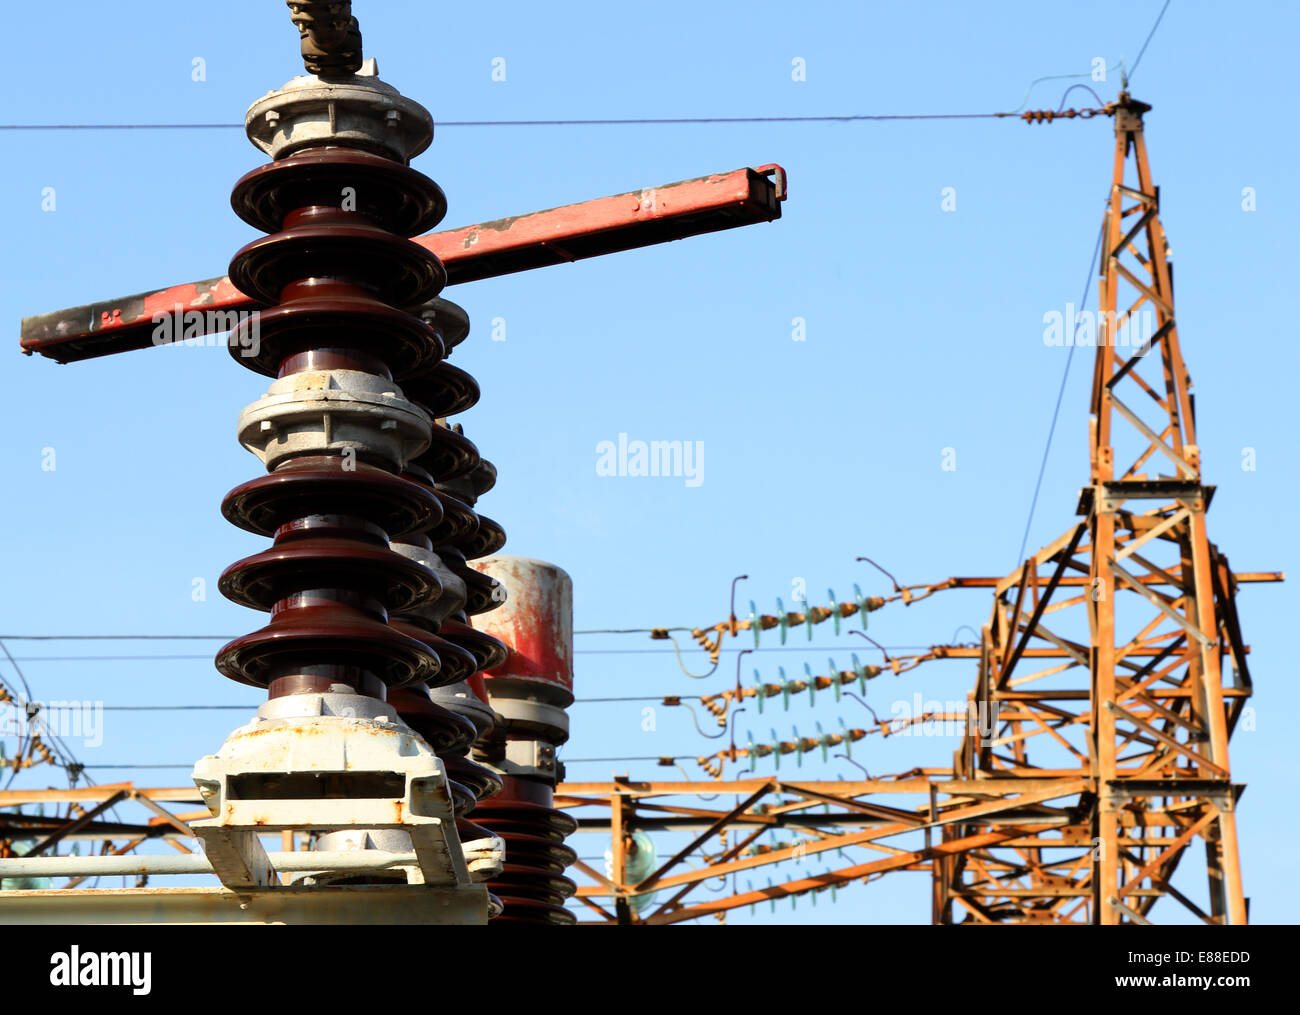 big  breakers  in a power plant with high voltage cables Stock Photo